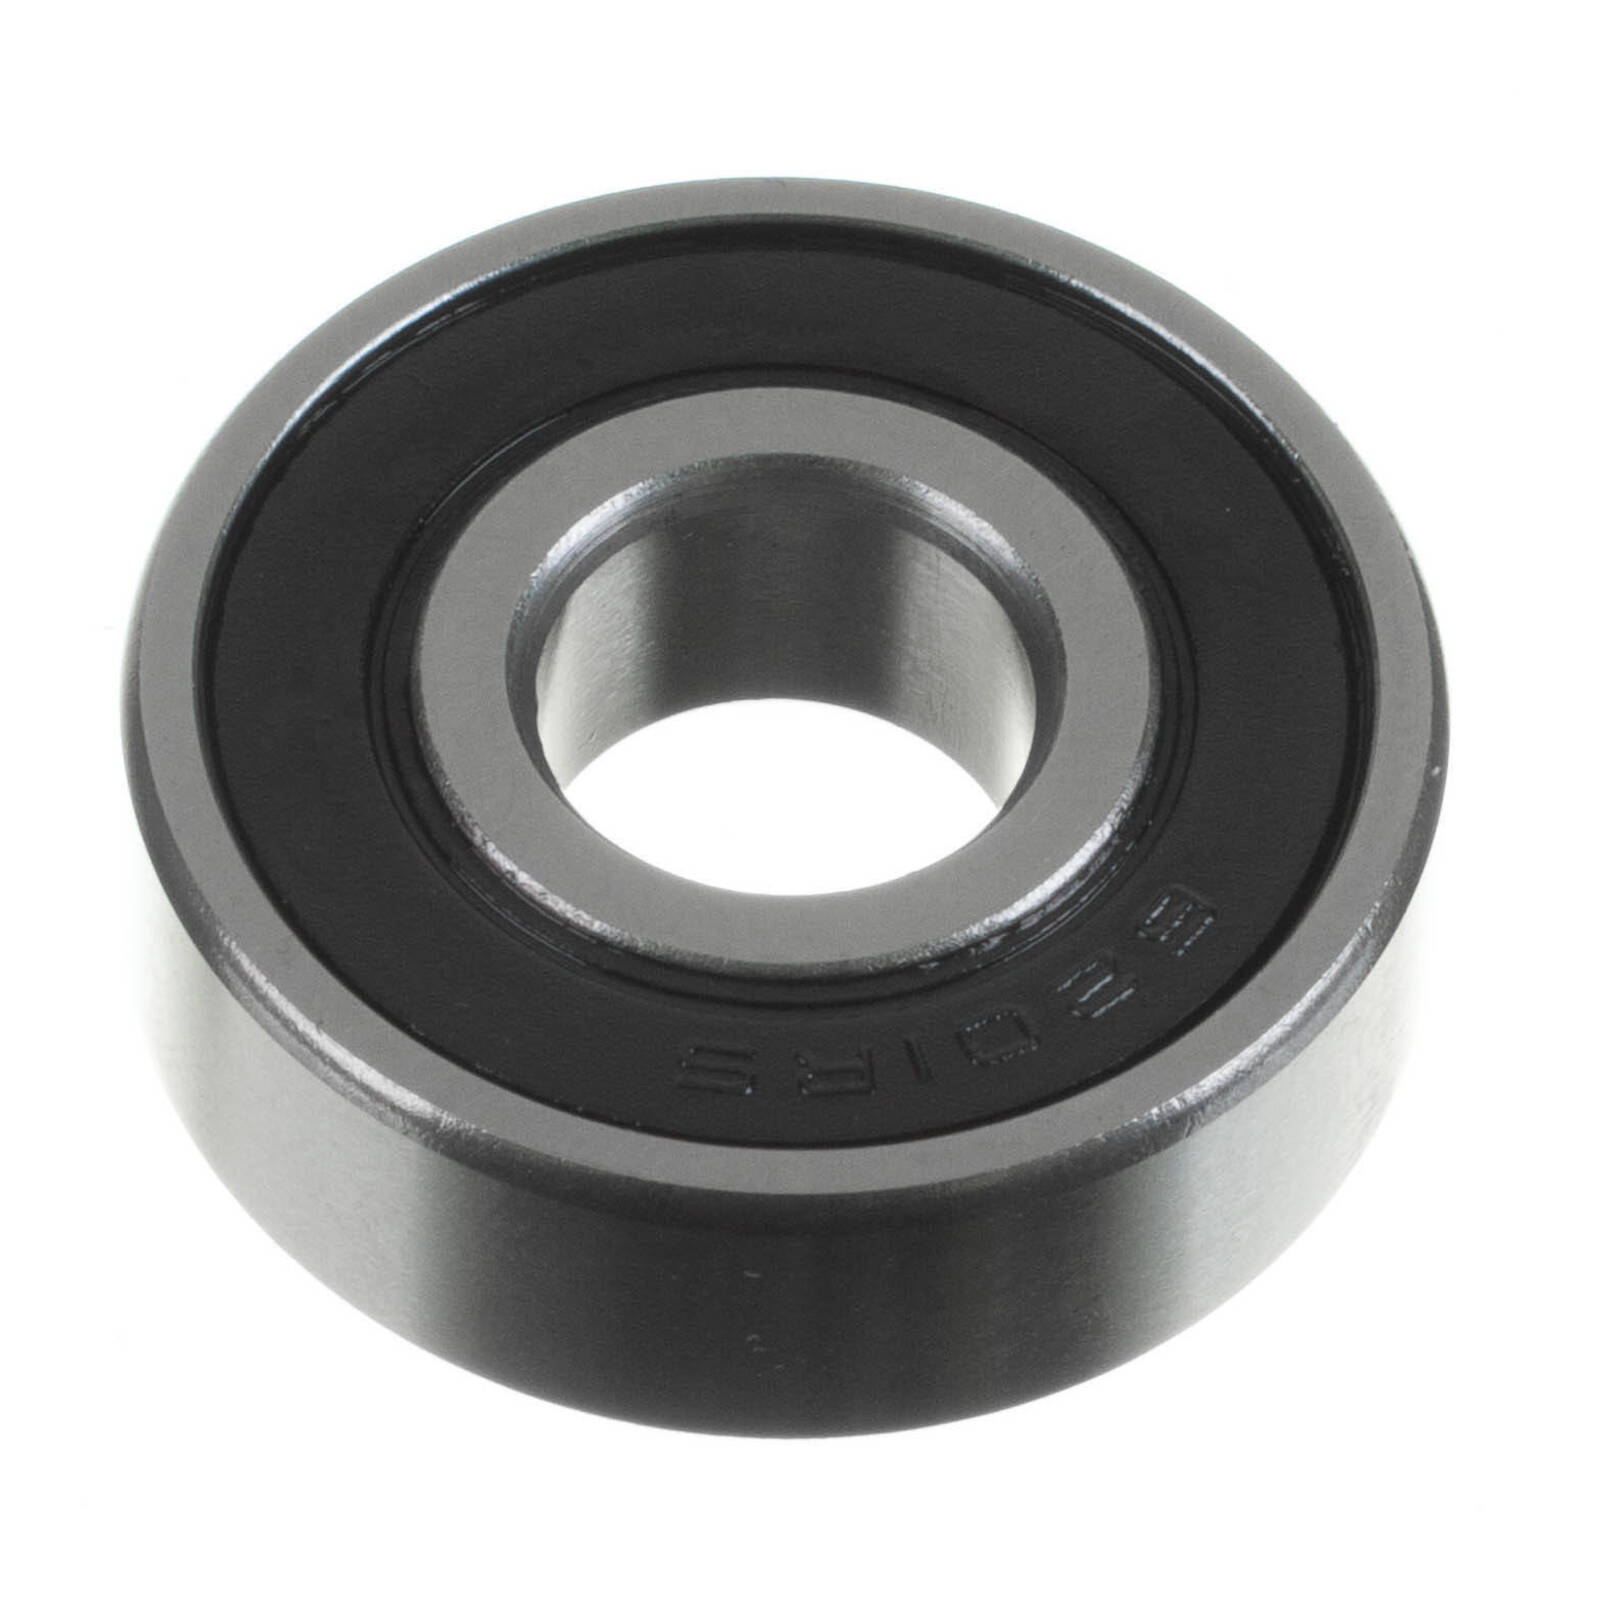 Bearing 6203 -2RS 1 piece/each